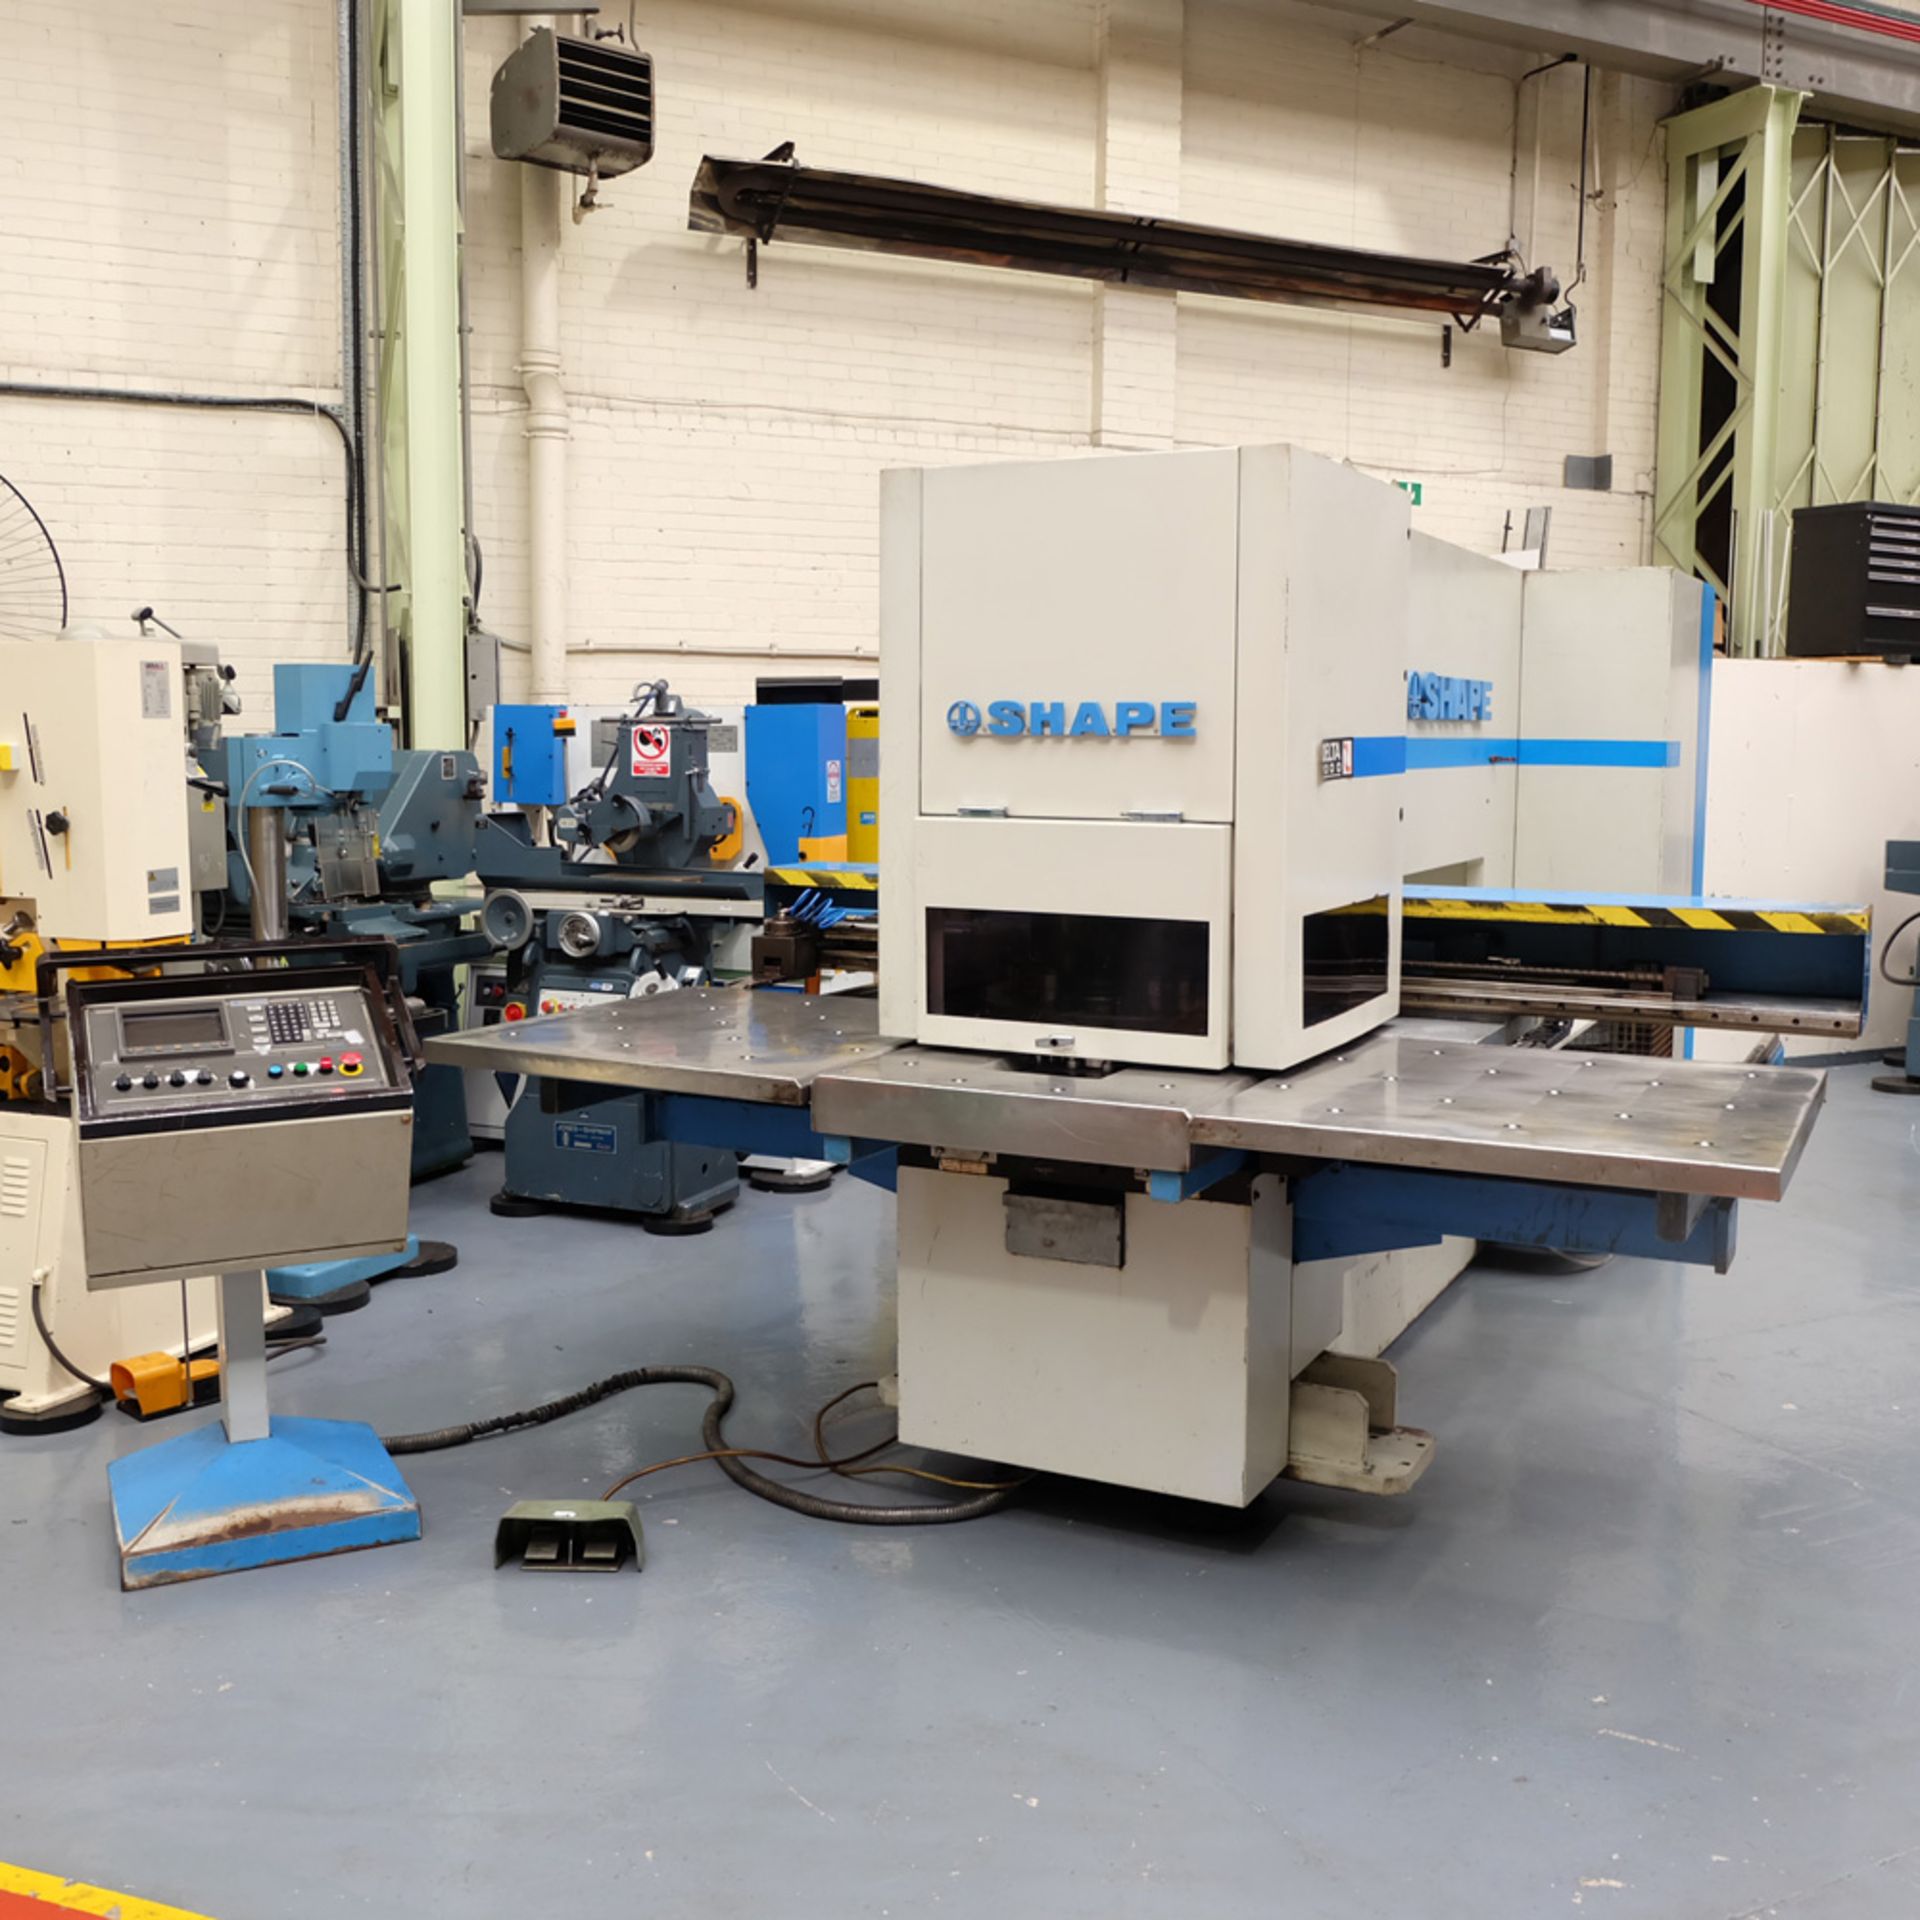 LVD SHAPE Model Delta 1000 Thick CNC Punching Machine.With Fanuc MNC 4000 Control.Capacity: 20 Tons. - Image 3 of 19